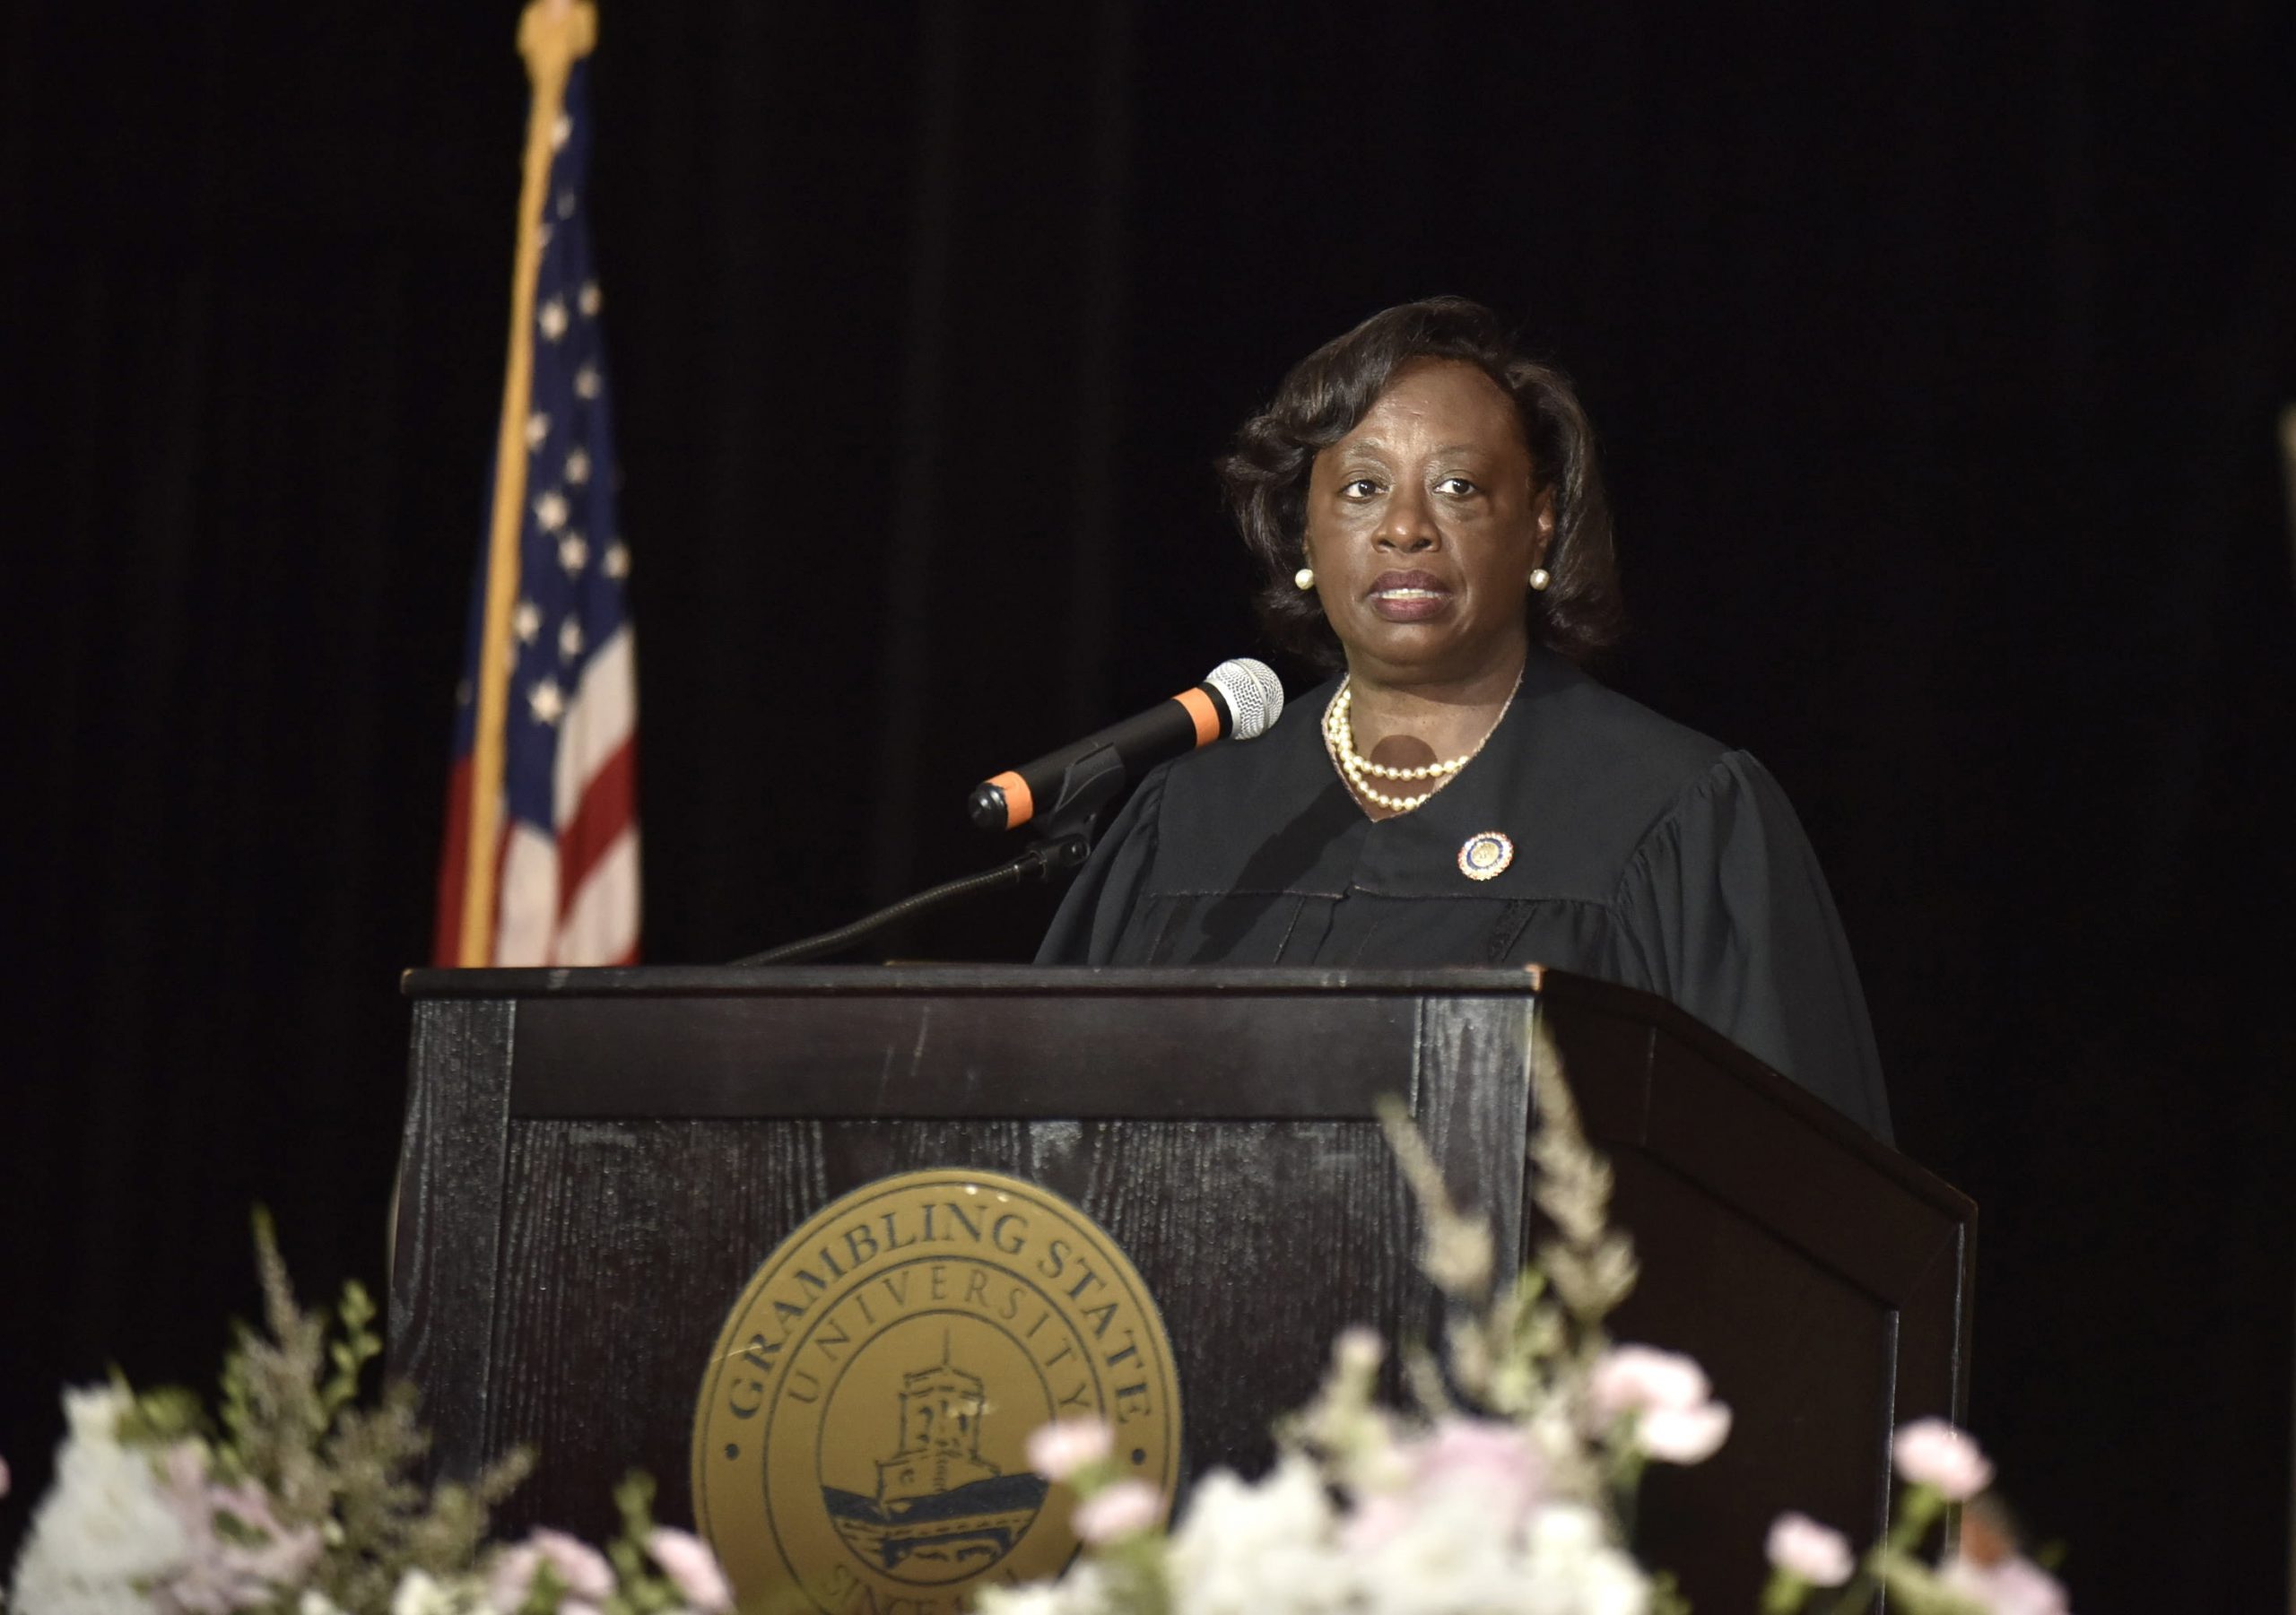 Associate Justice Griffin encourages campus community to remain vigilant about life, freedom, and prosperity during Constitution Day address